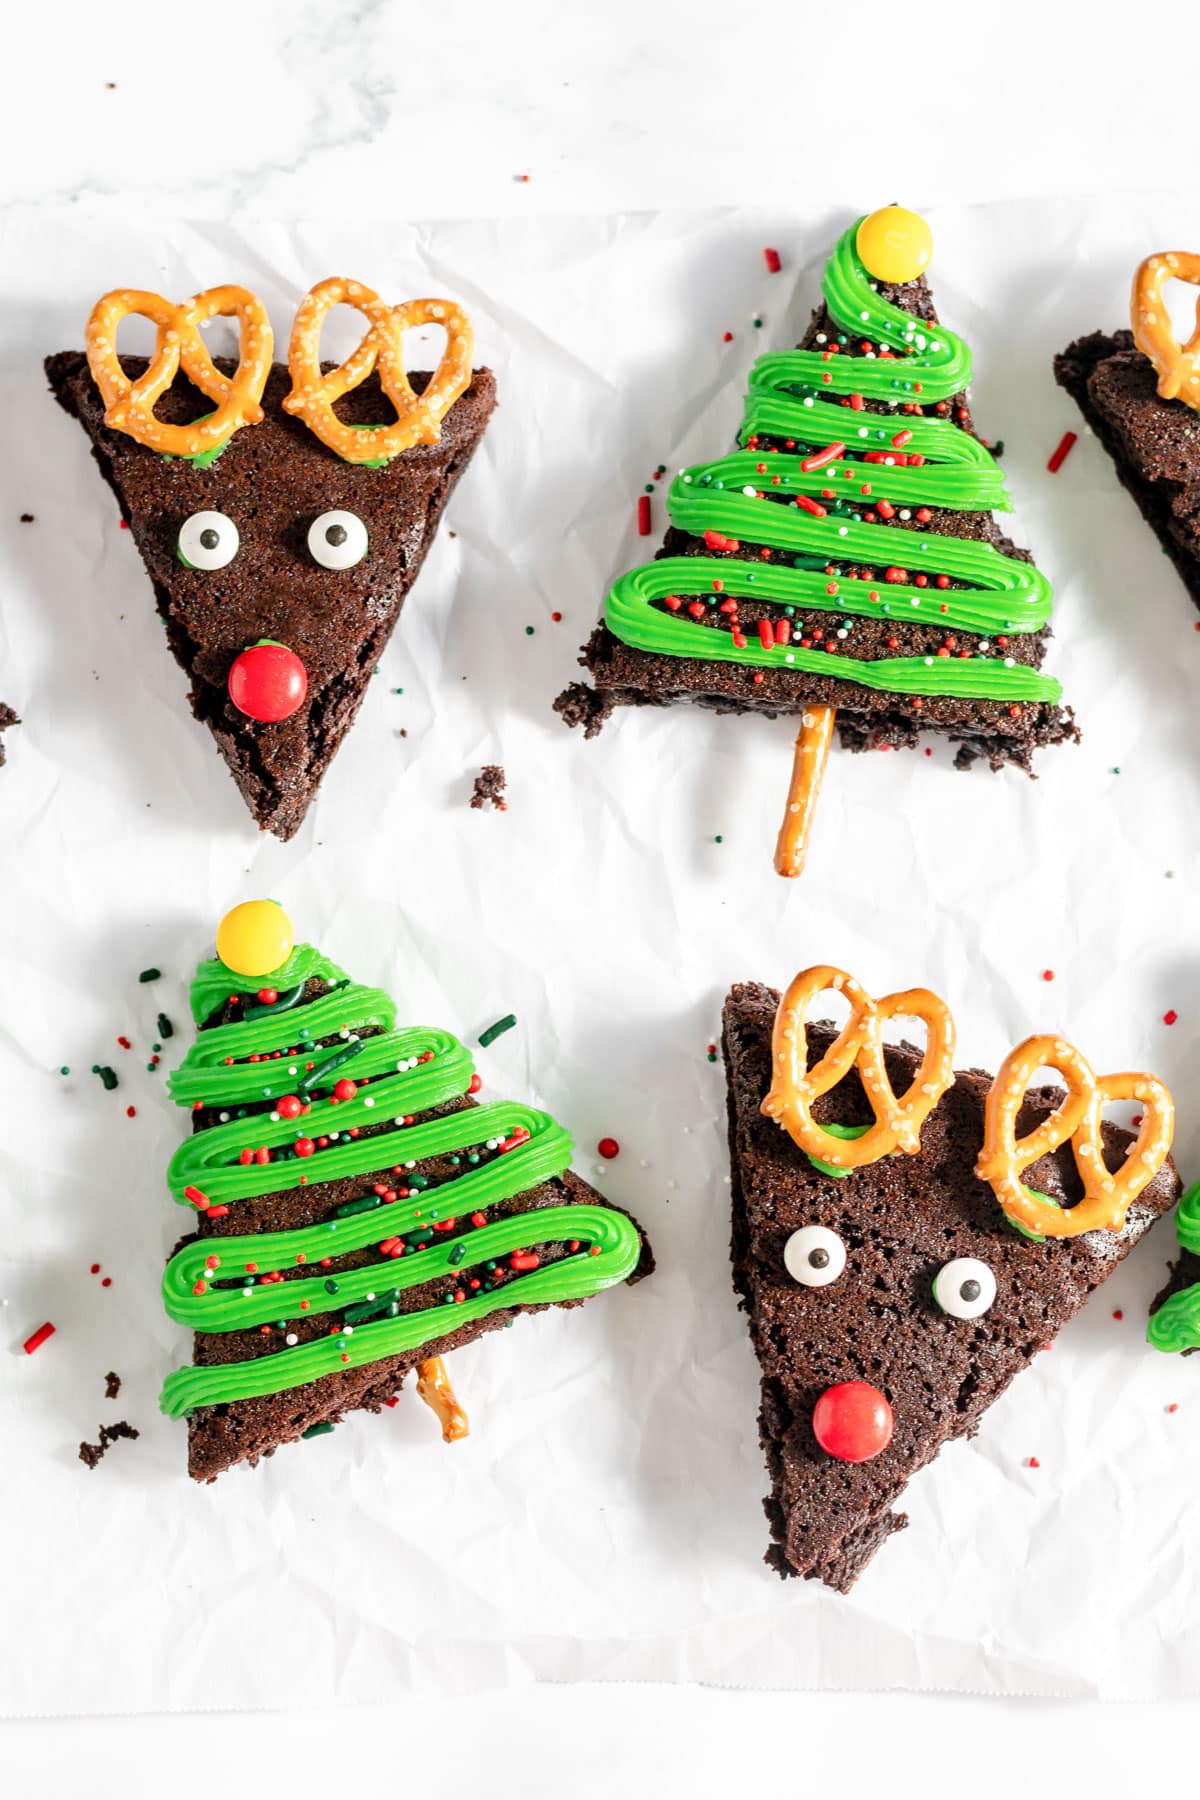 Four Christmas brownies in the shape of triangles and decorated like Christmas trees and reindeer with green frosting, candy eyes, M&Ms and pretzels.